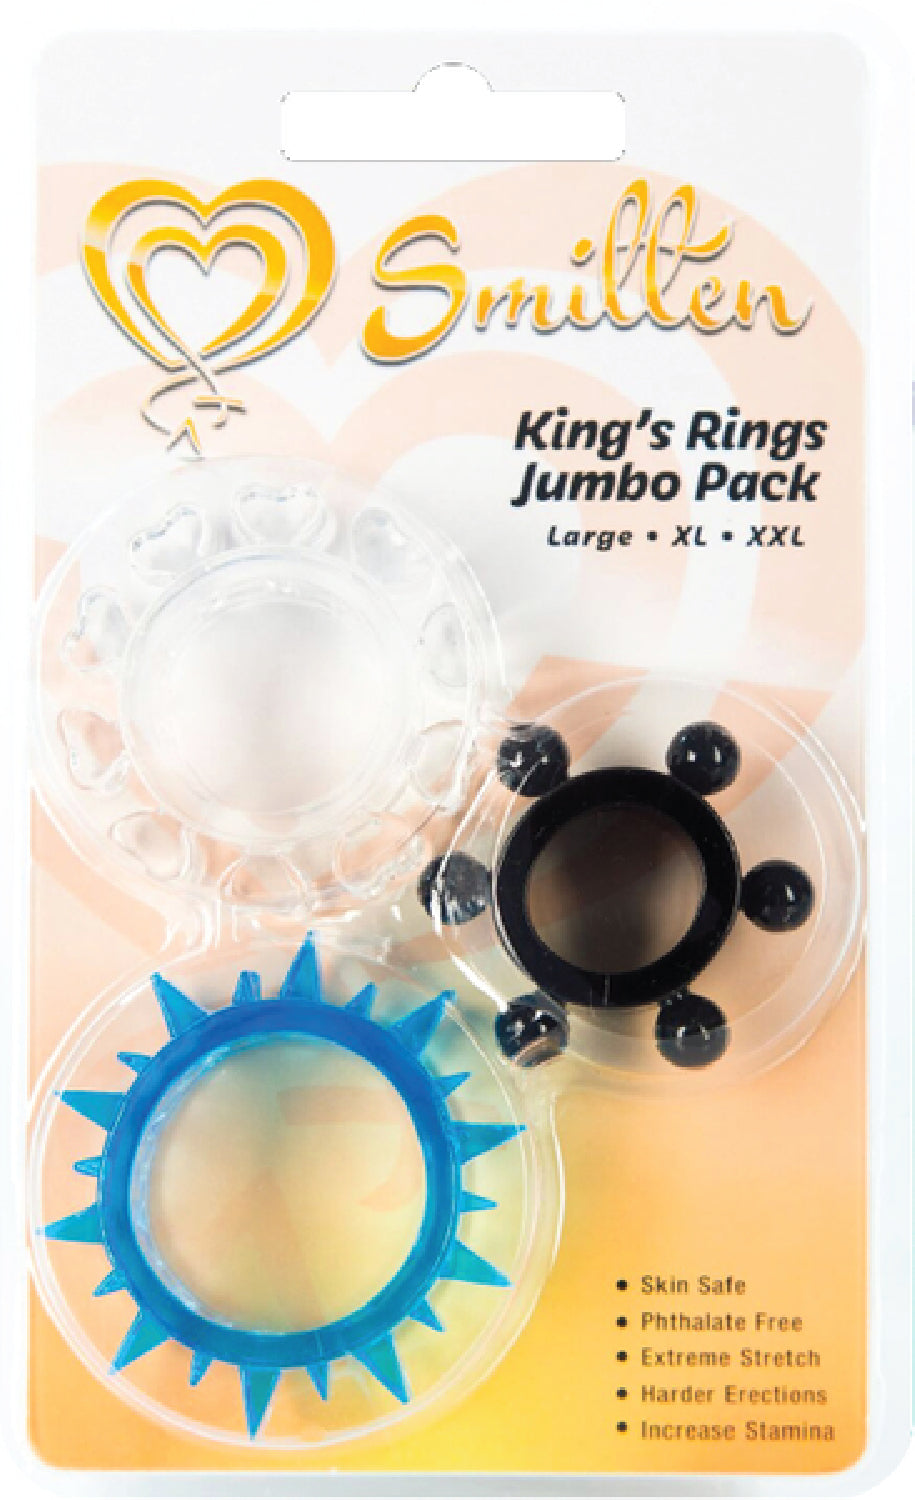 King's Rings Jumbo Pack 3-Pack - One Stop Adult Shop